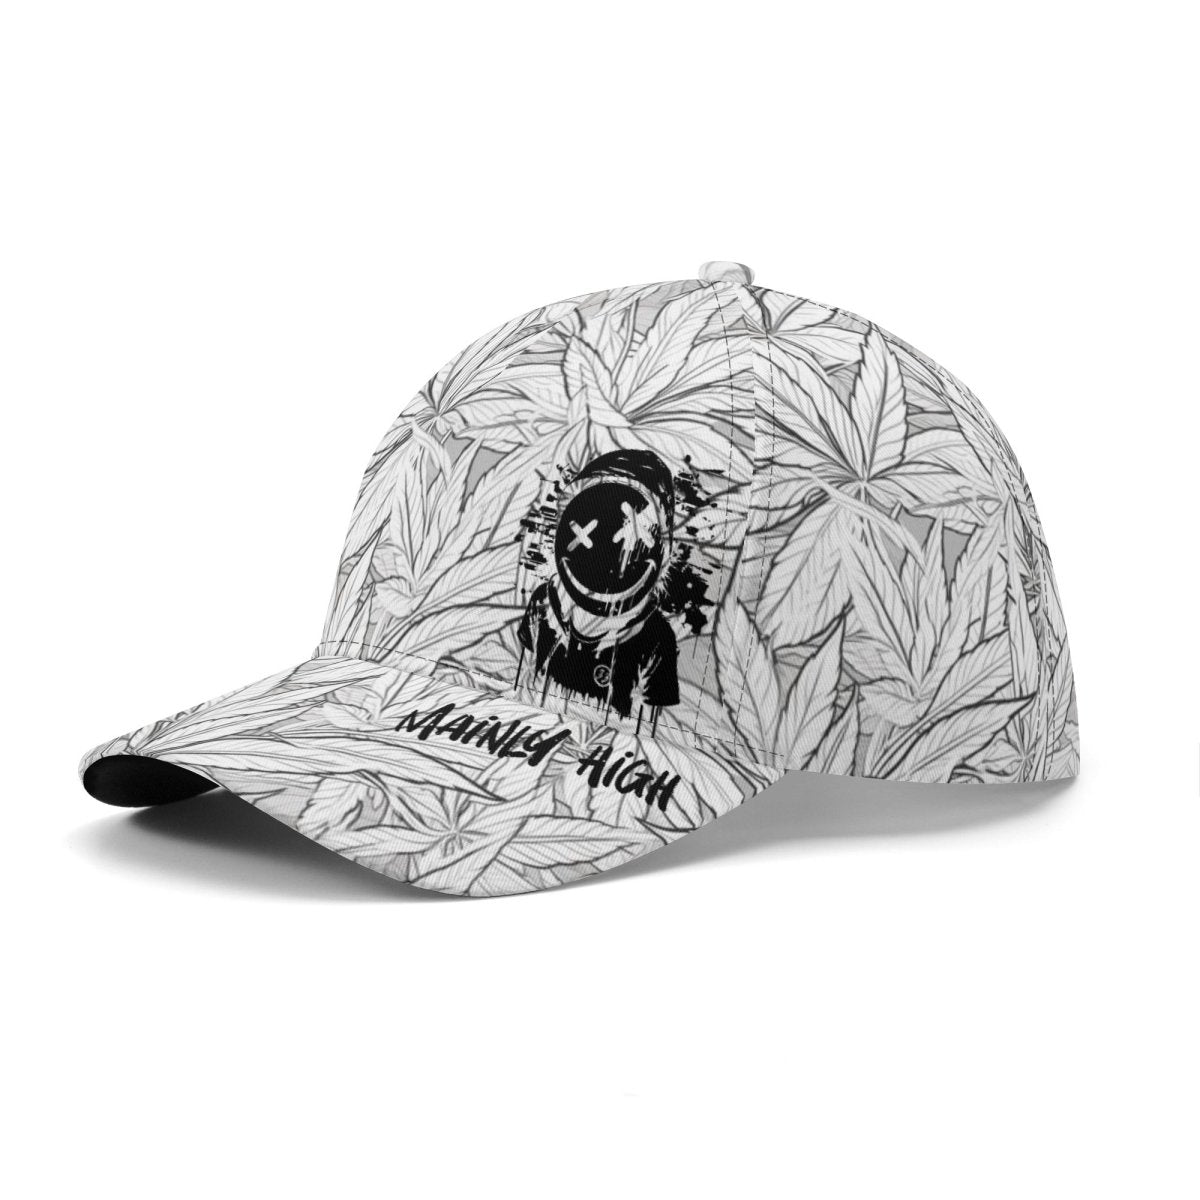 B&W Leaves Cap - Mainly High